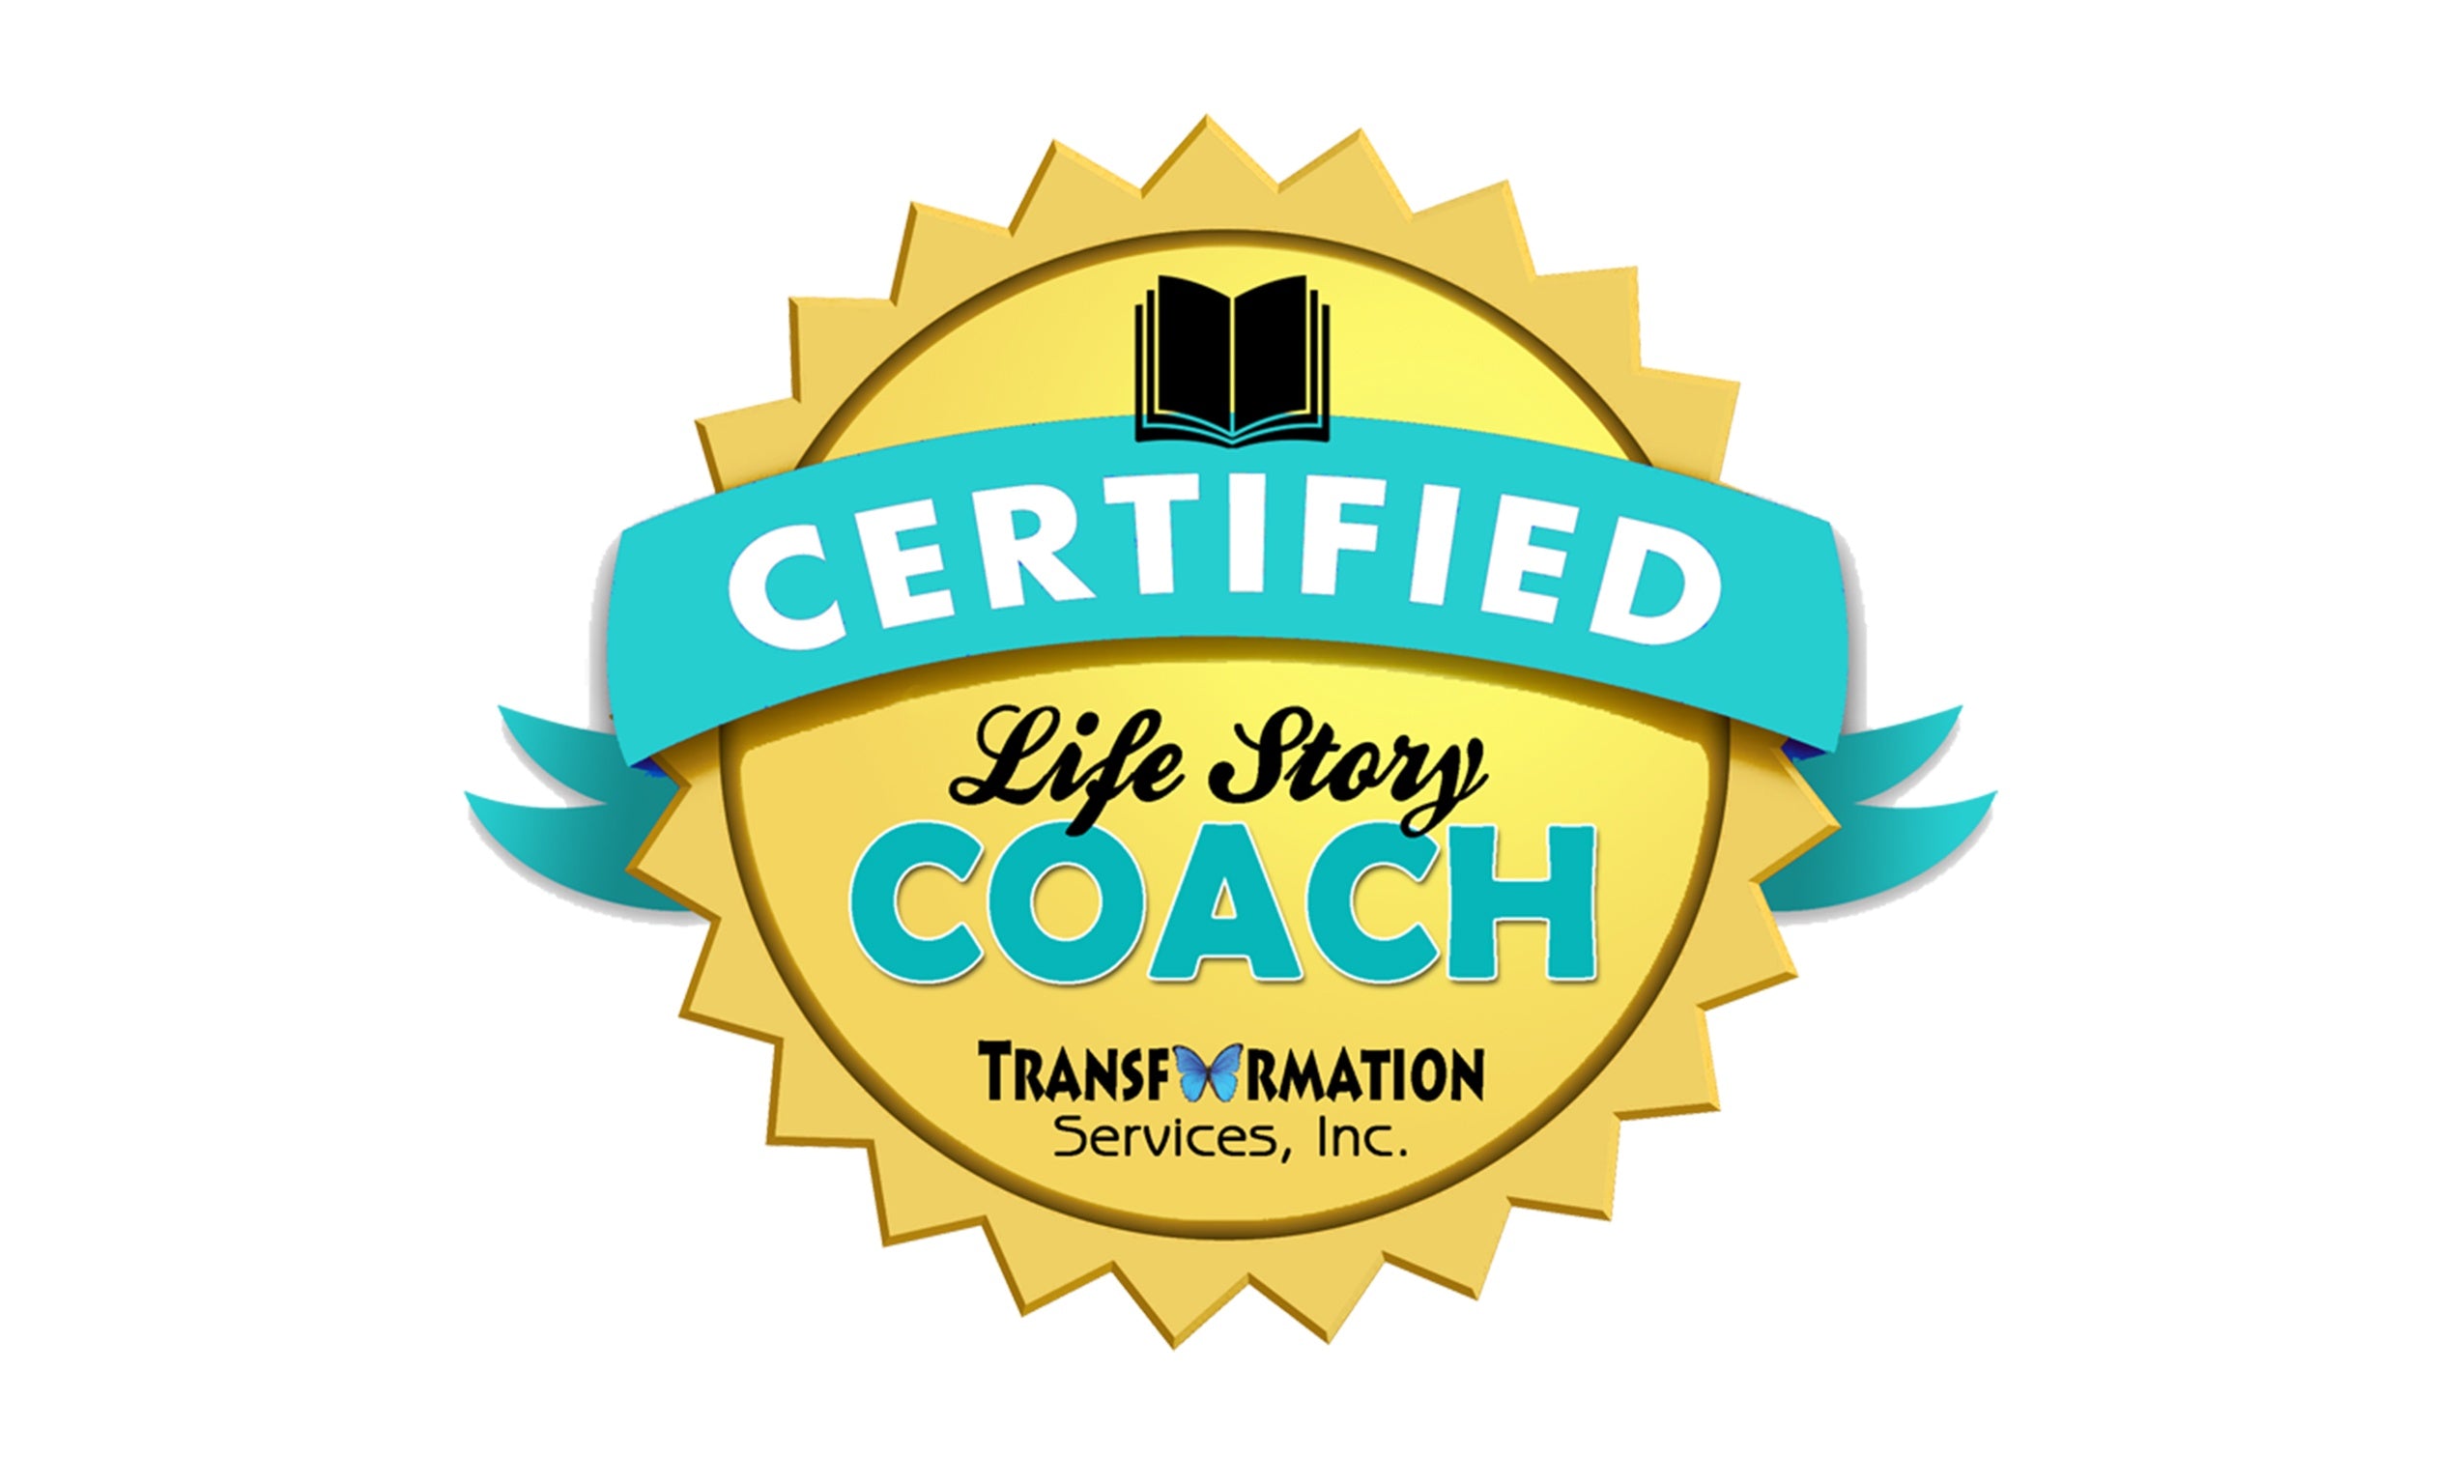 Life Story Life Coach Certifcation